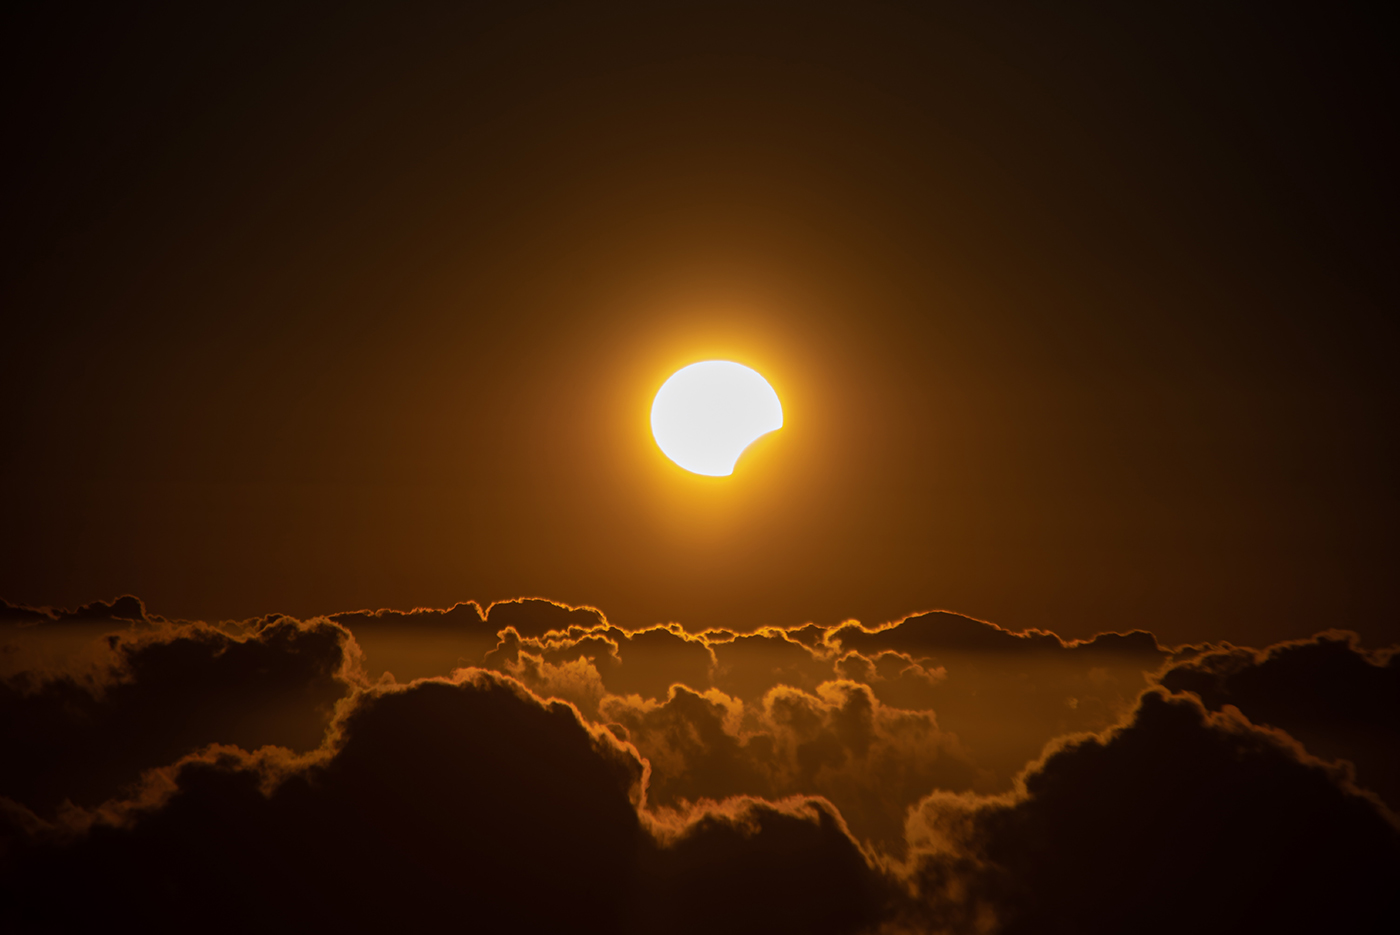 A view on the partial solar eclipse seen over the sea of clouds in Garafia, Canary Islands, Spain - 8 April 2024 (Miguel Calero/Shutterstock)